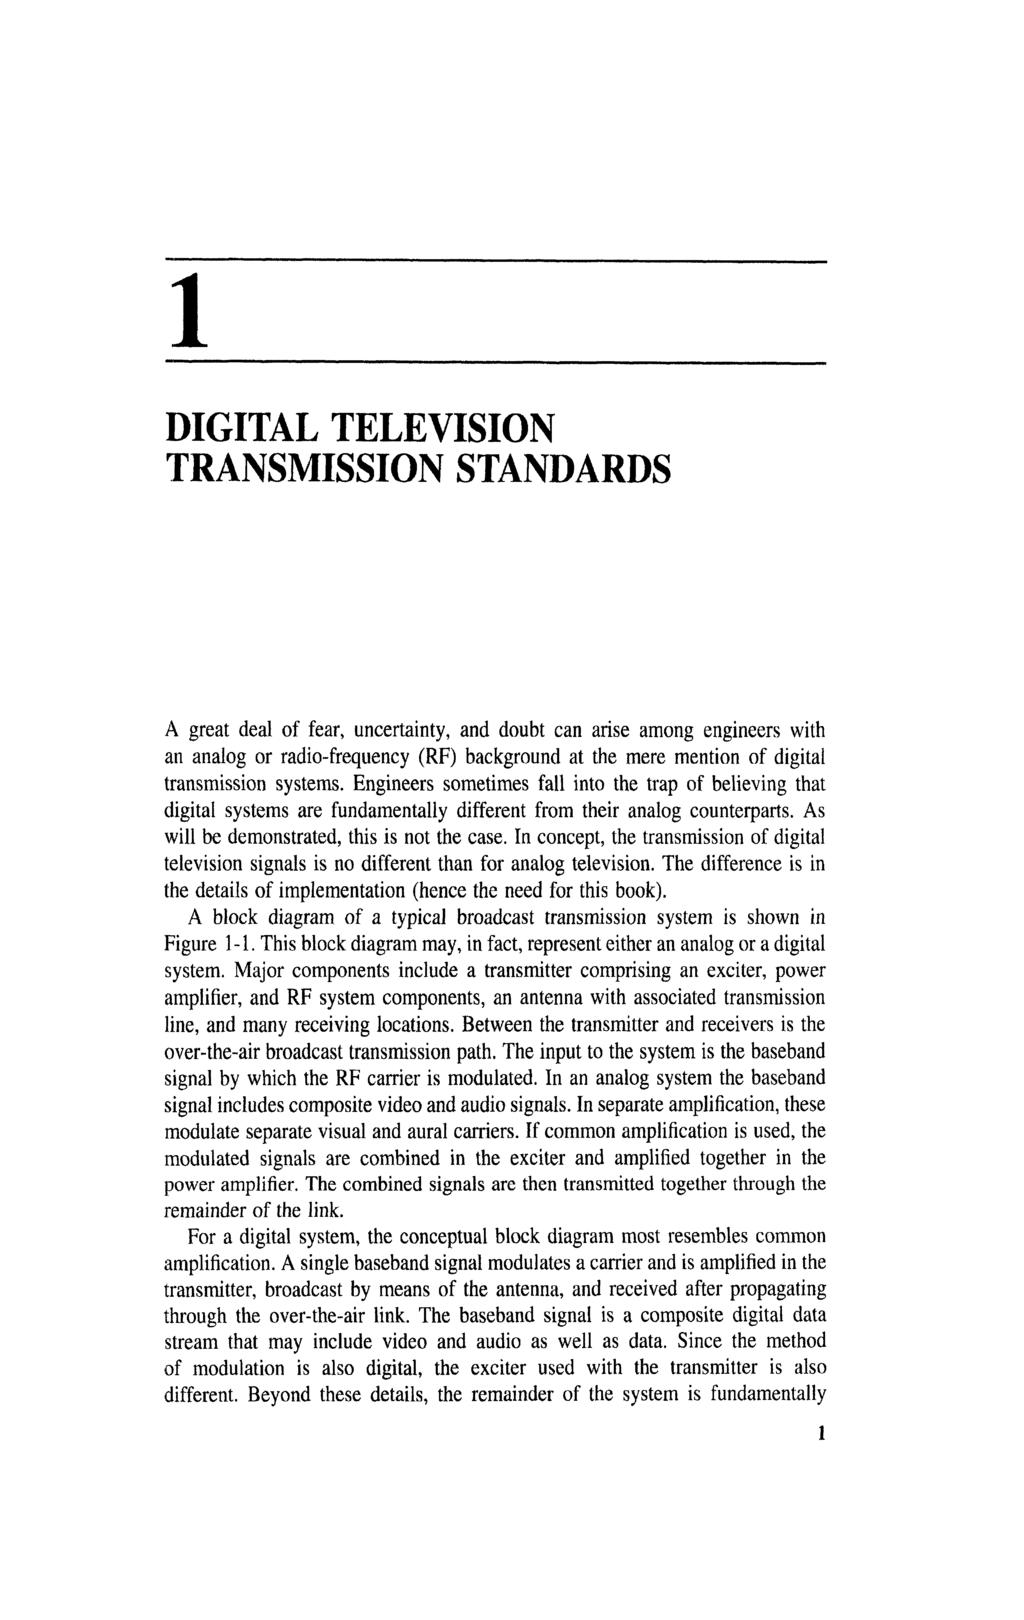 1 DIGITAL TELEVISION TRANSMISSION STANDARDS A great deal of fear, uncertainty, and doubt can arise among engineers with an analog or radio-frequency (RF) background at the mere mention of digital